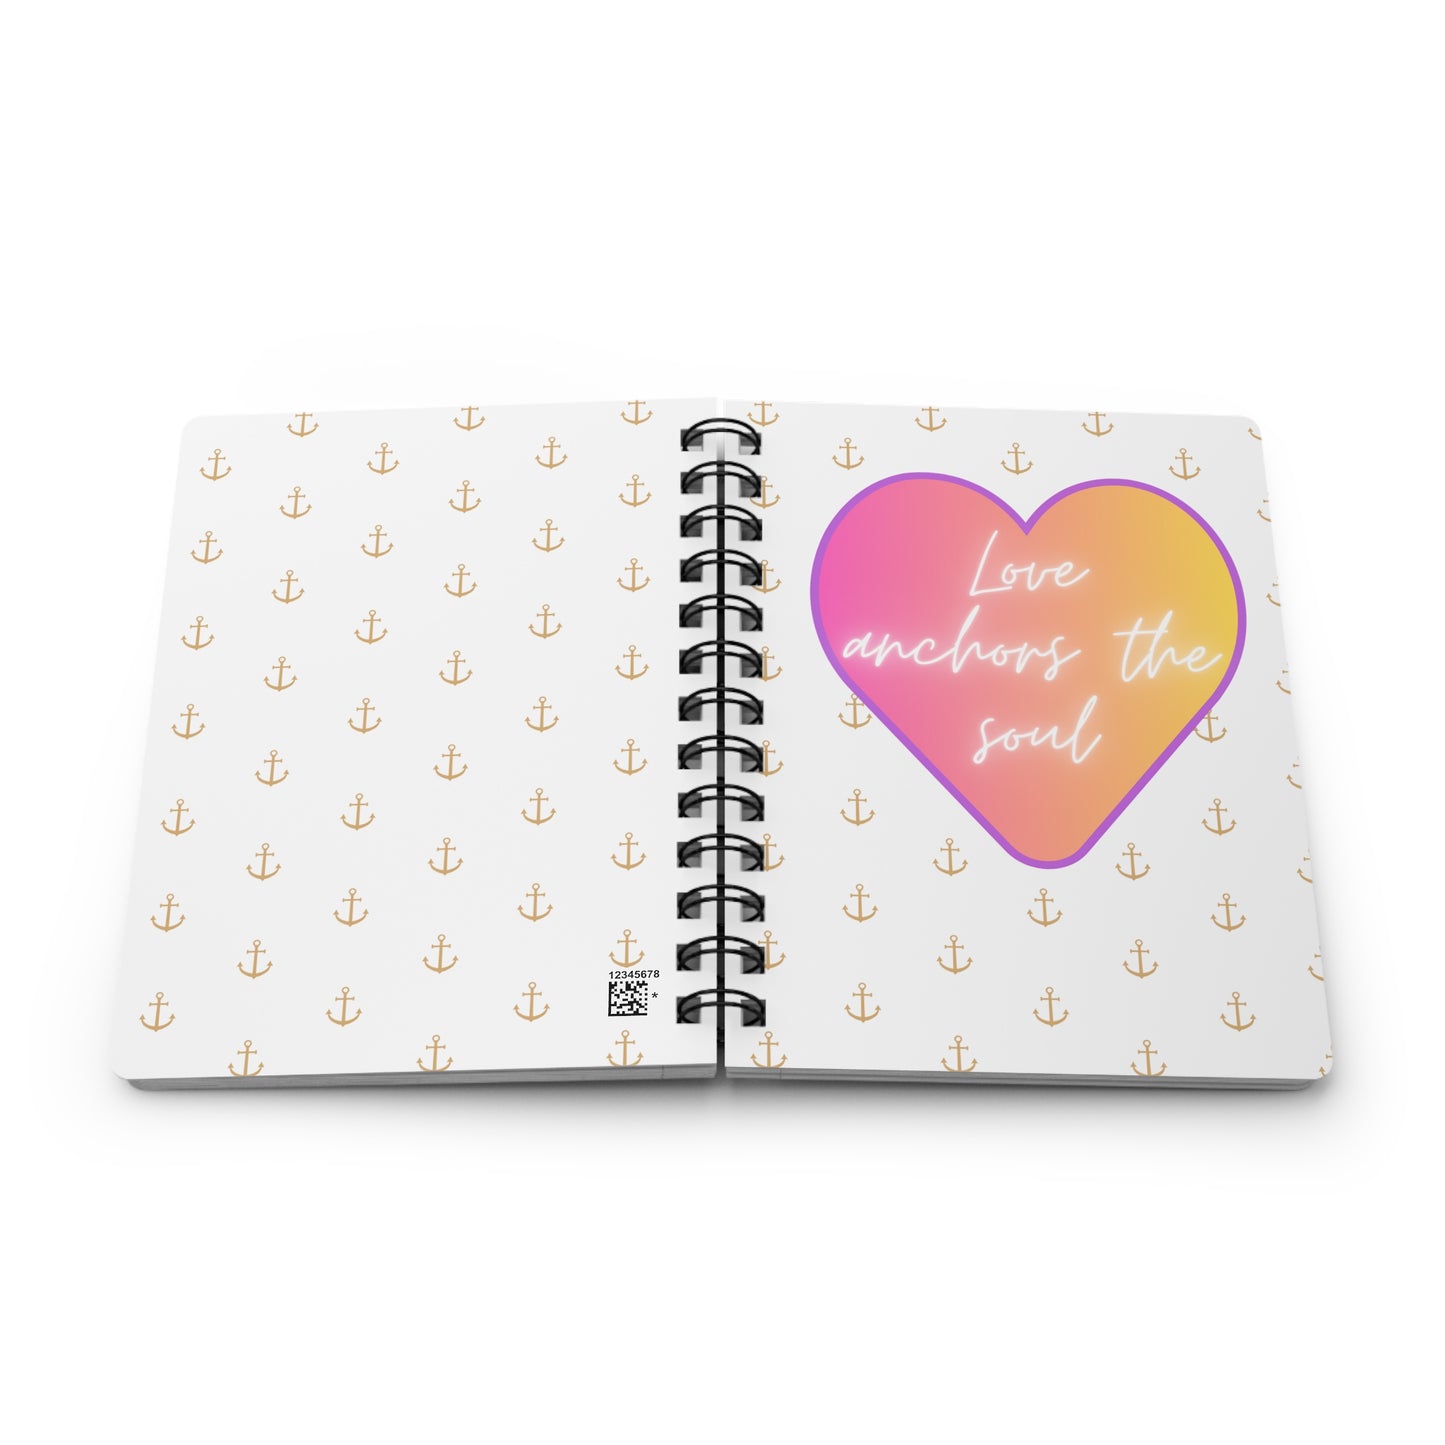 Love anchors the soul - Spiral Bound Journal (White)